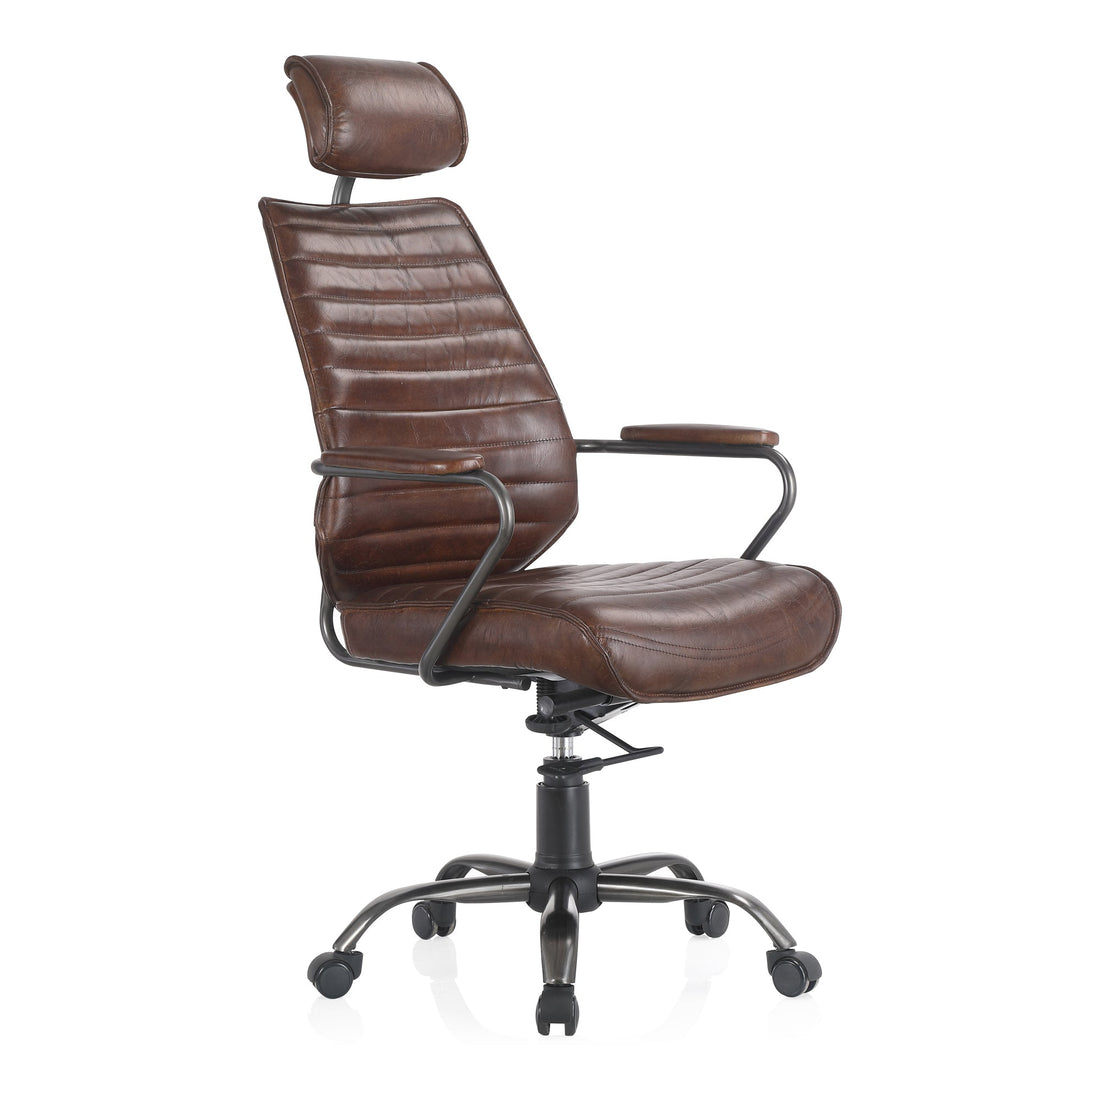 Executive Office Chair Brown: Comfort Meets Professionalism